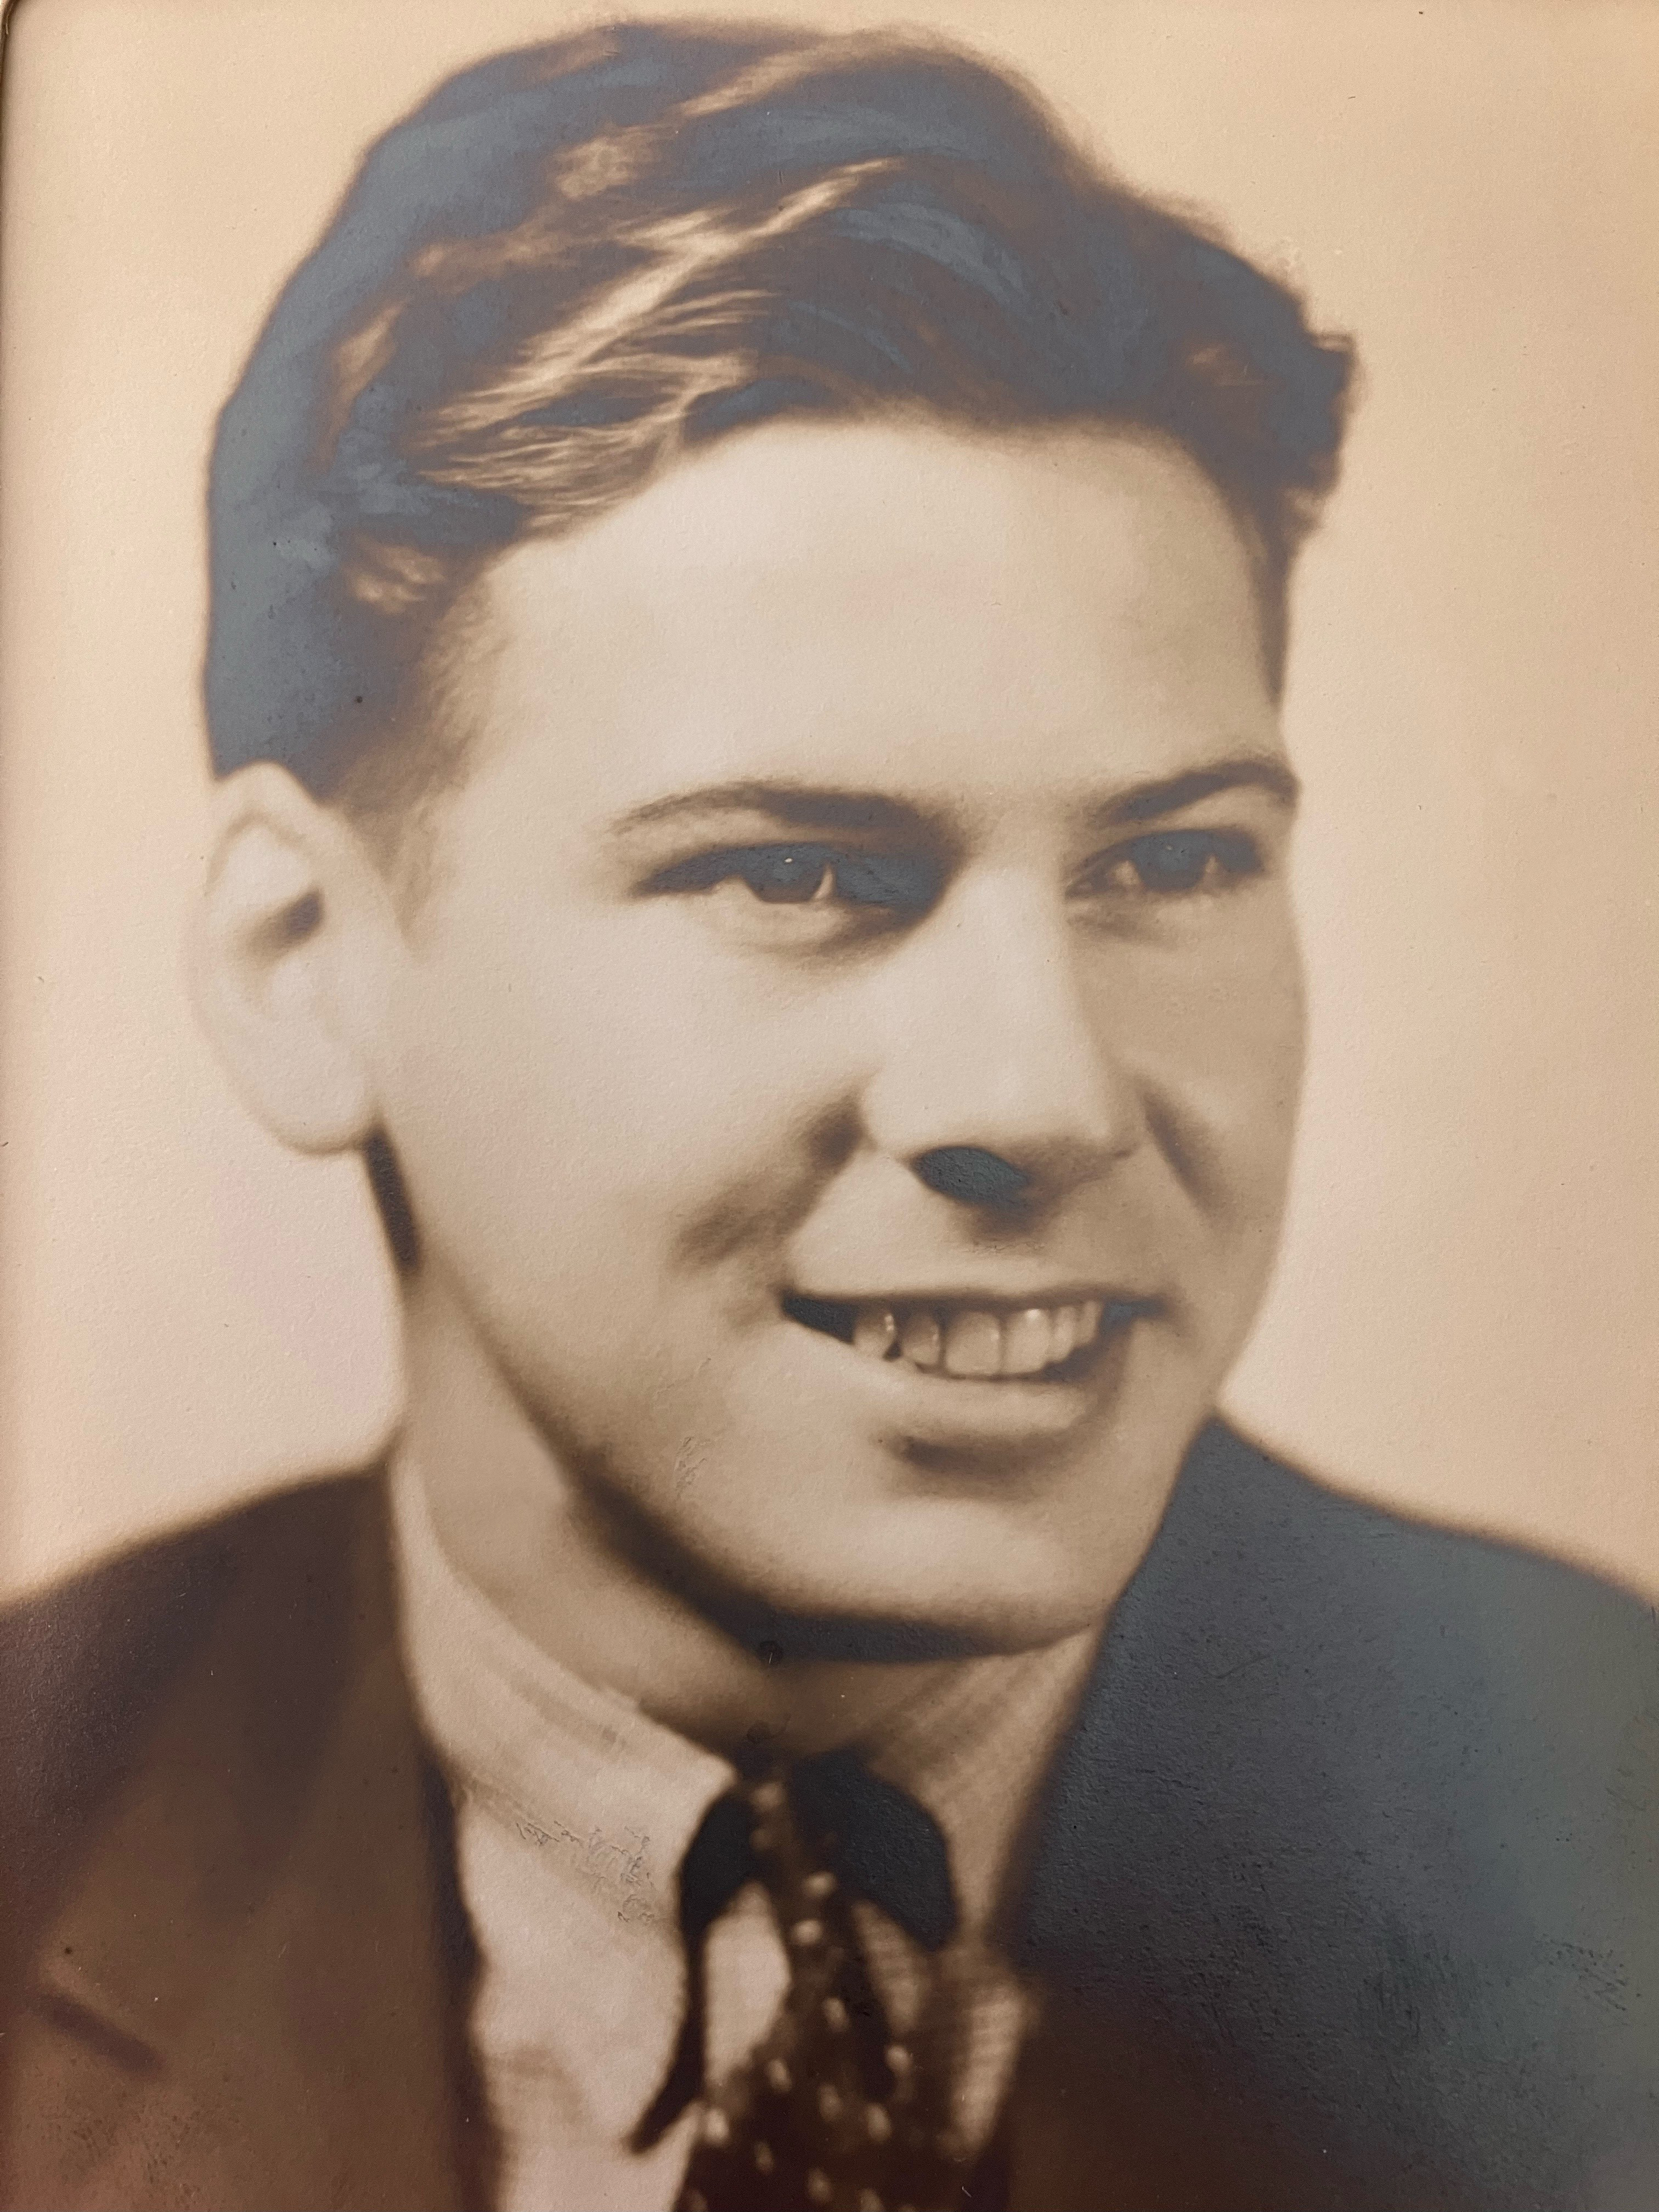 a black and white headshot of a young man, Alan Sim